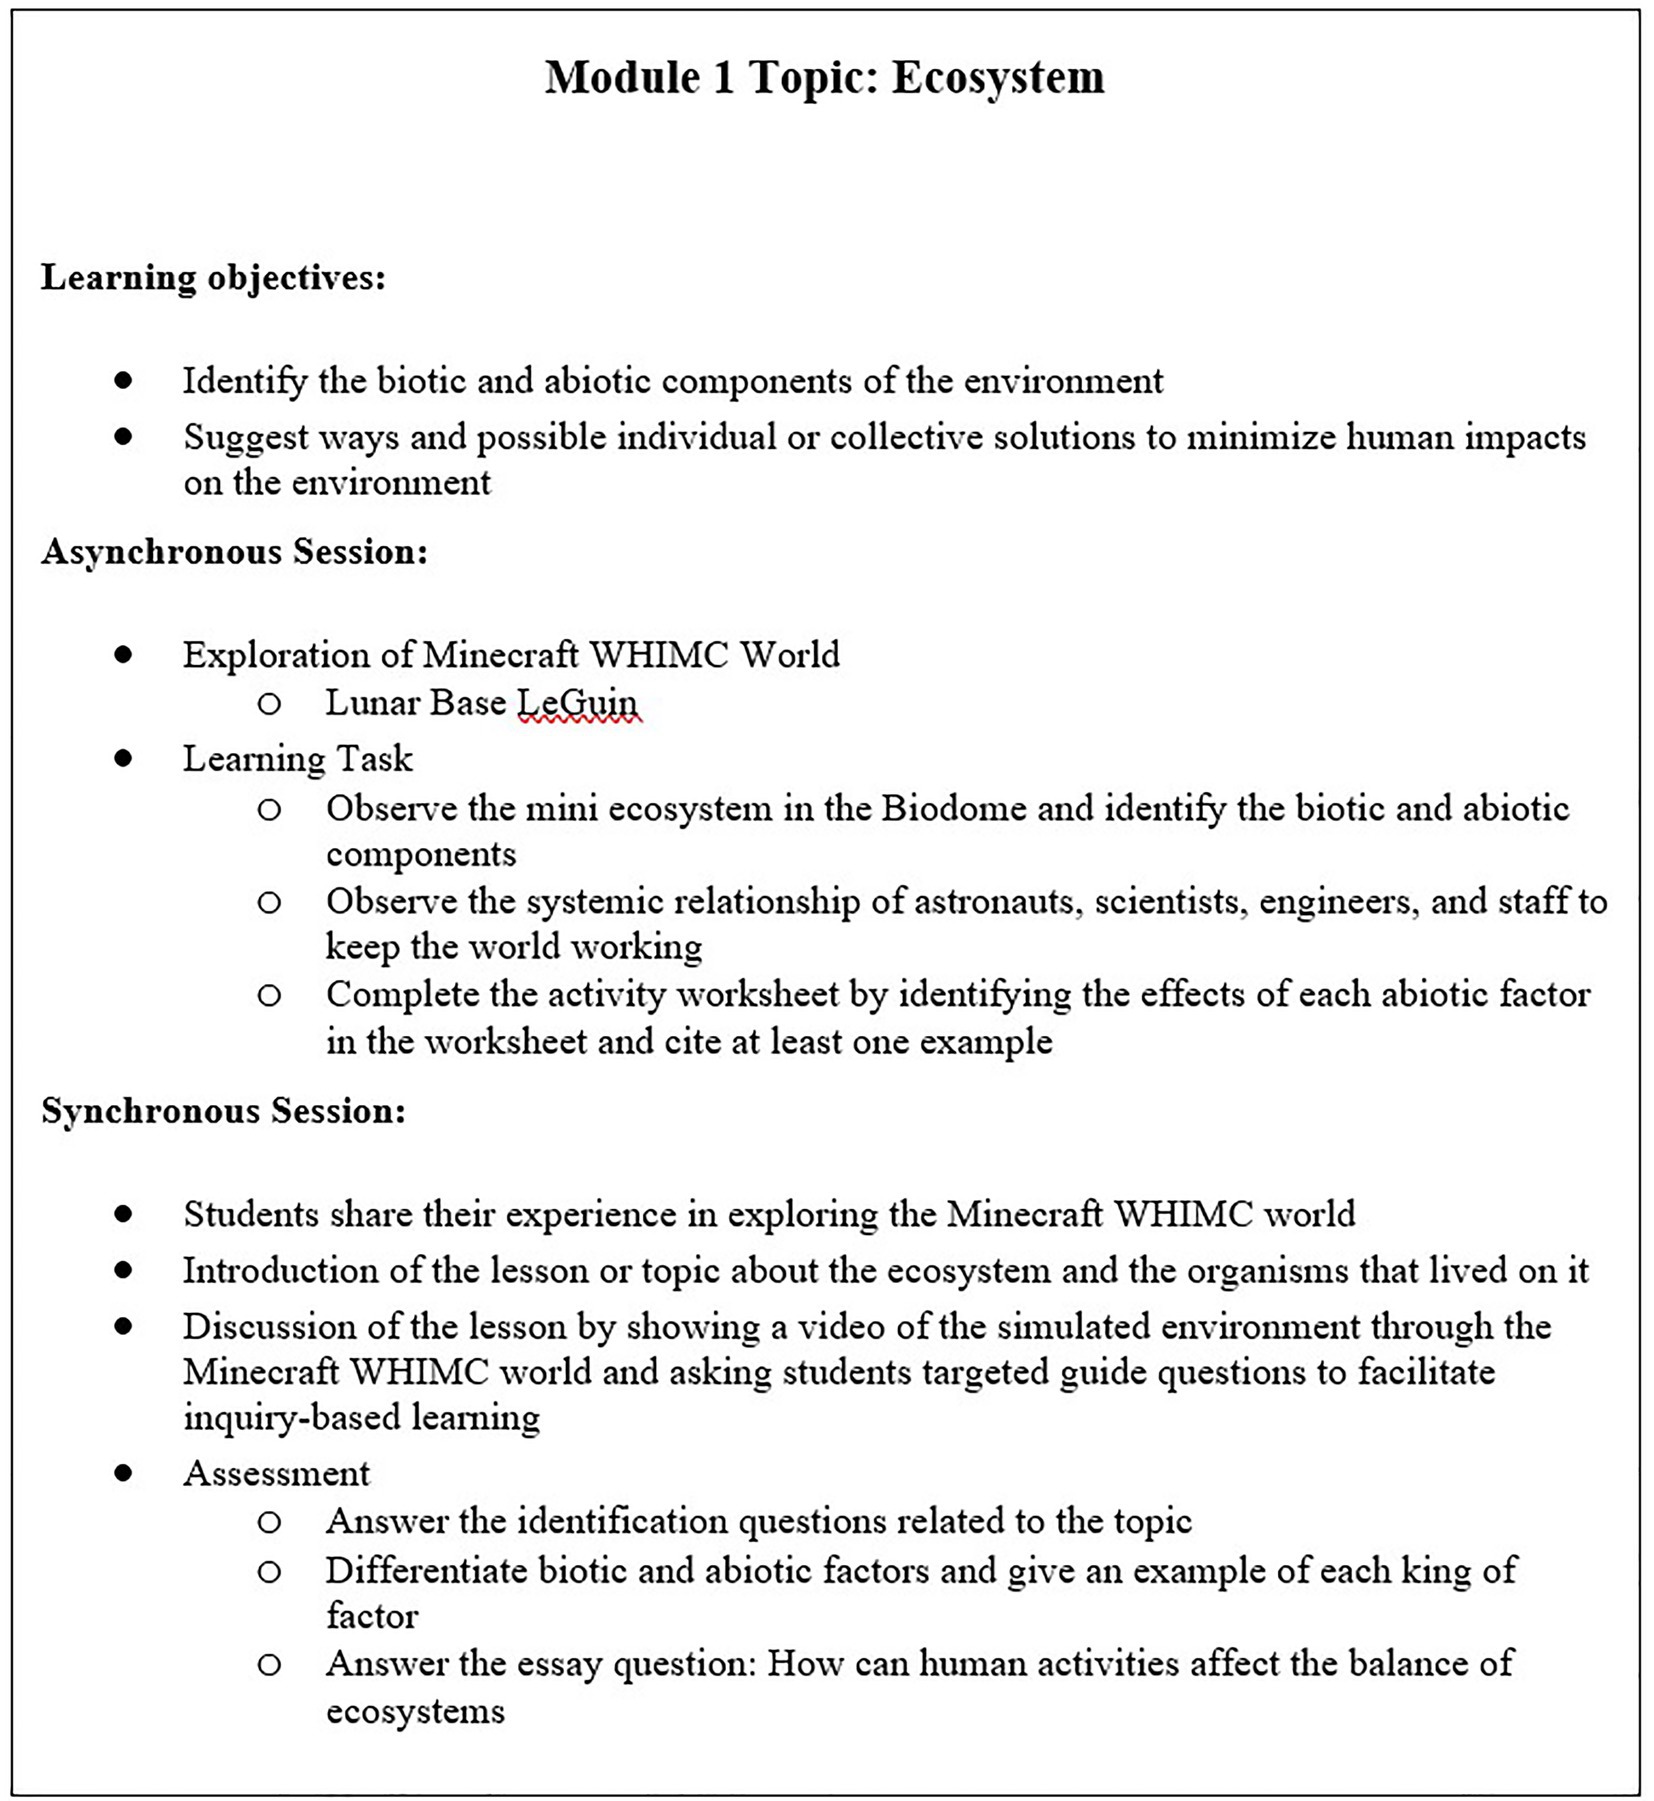 PDF) The Acquisition of 21 st -Century Skills Through Video Games: Minecraft  Design Process Models and Their Web of Class Roles